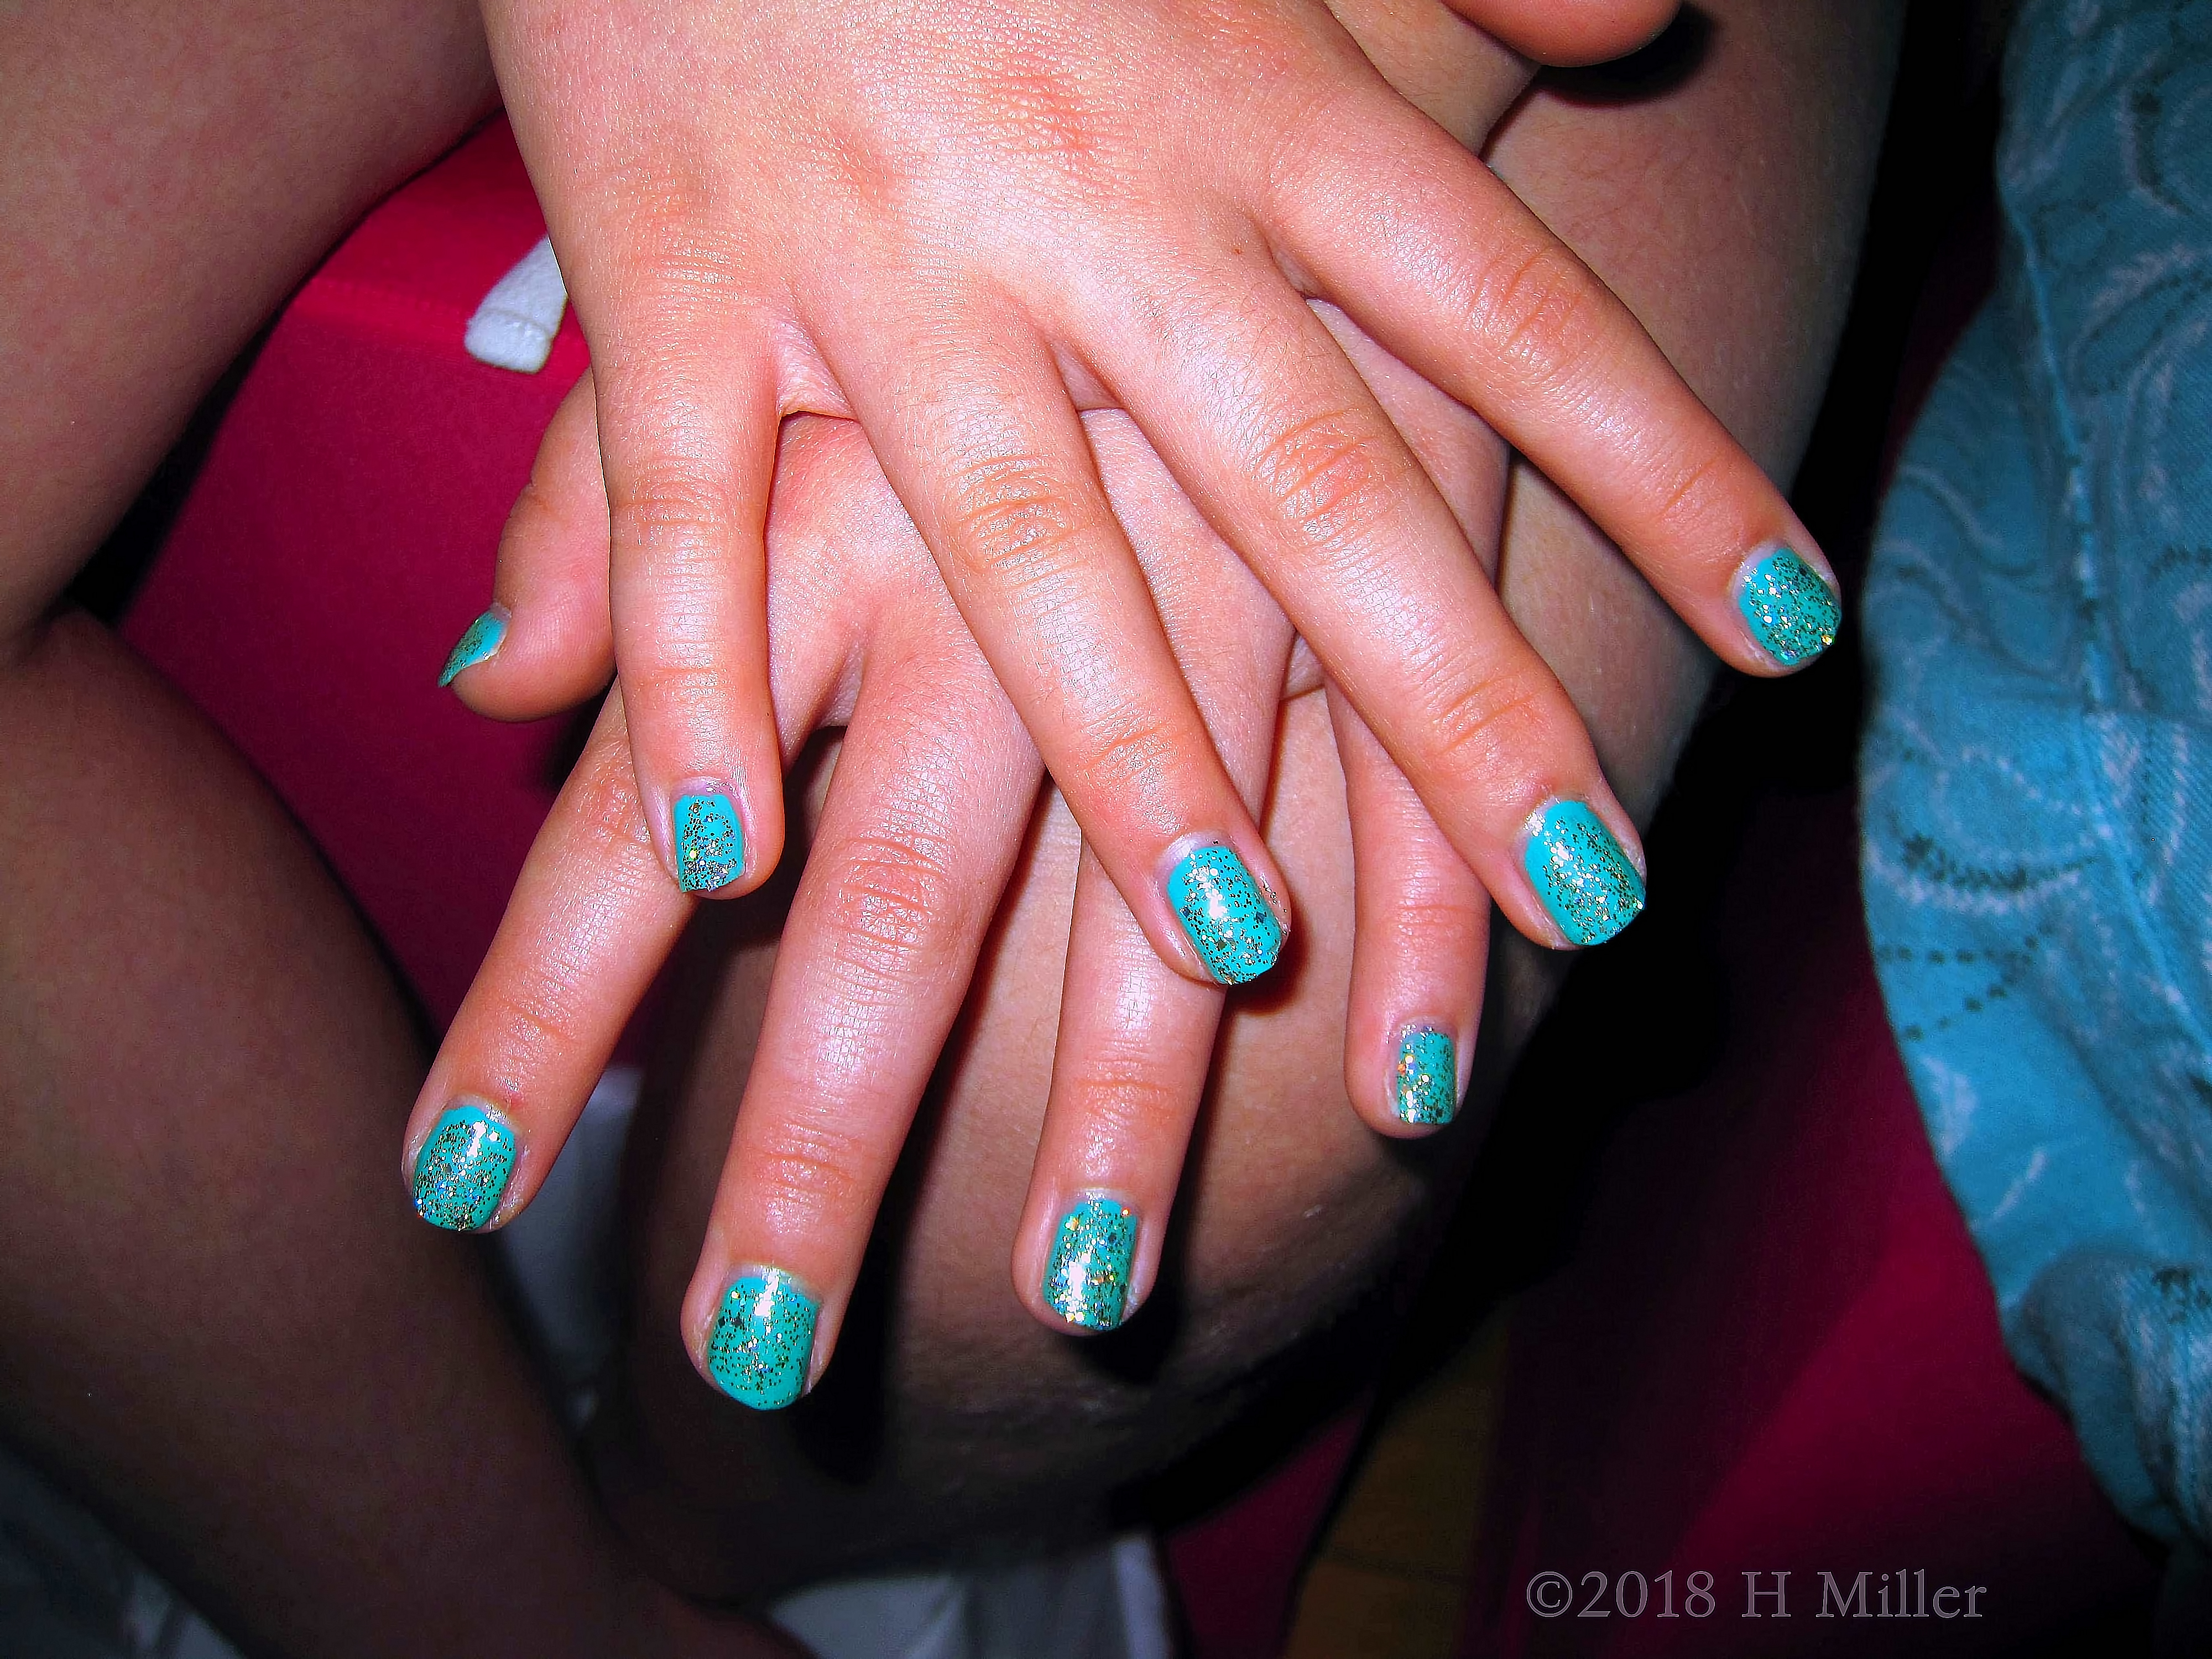 Yet Another Picture Of This Pretty Blue Sparkly Kids Manicure! 